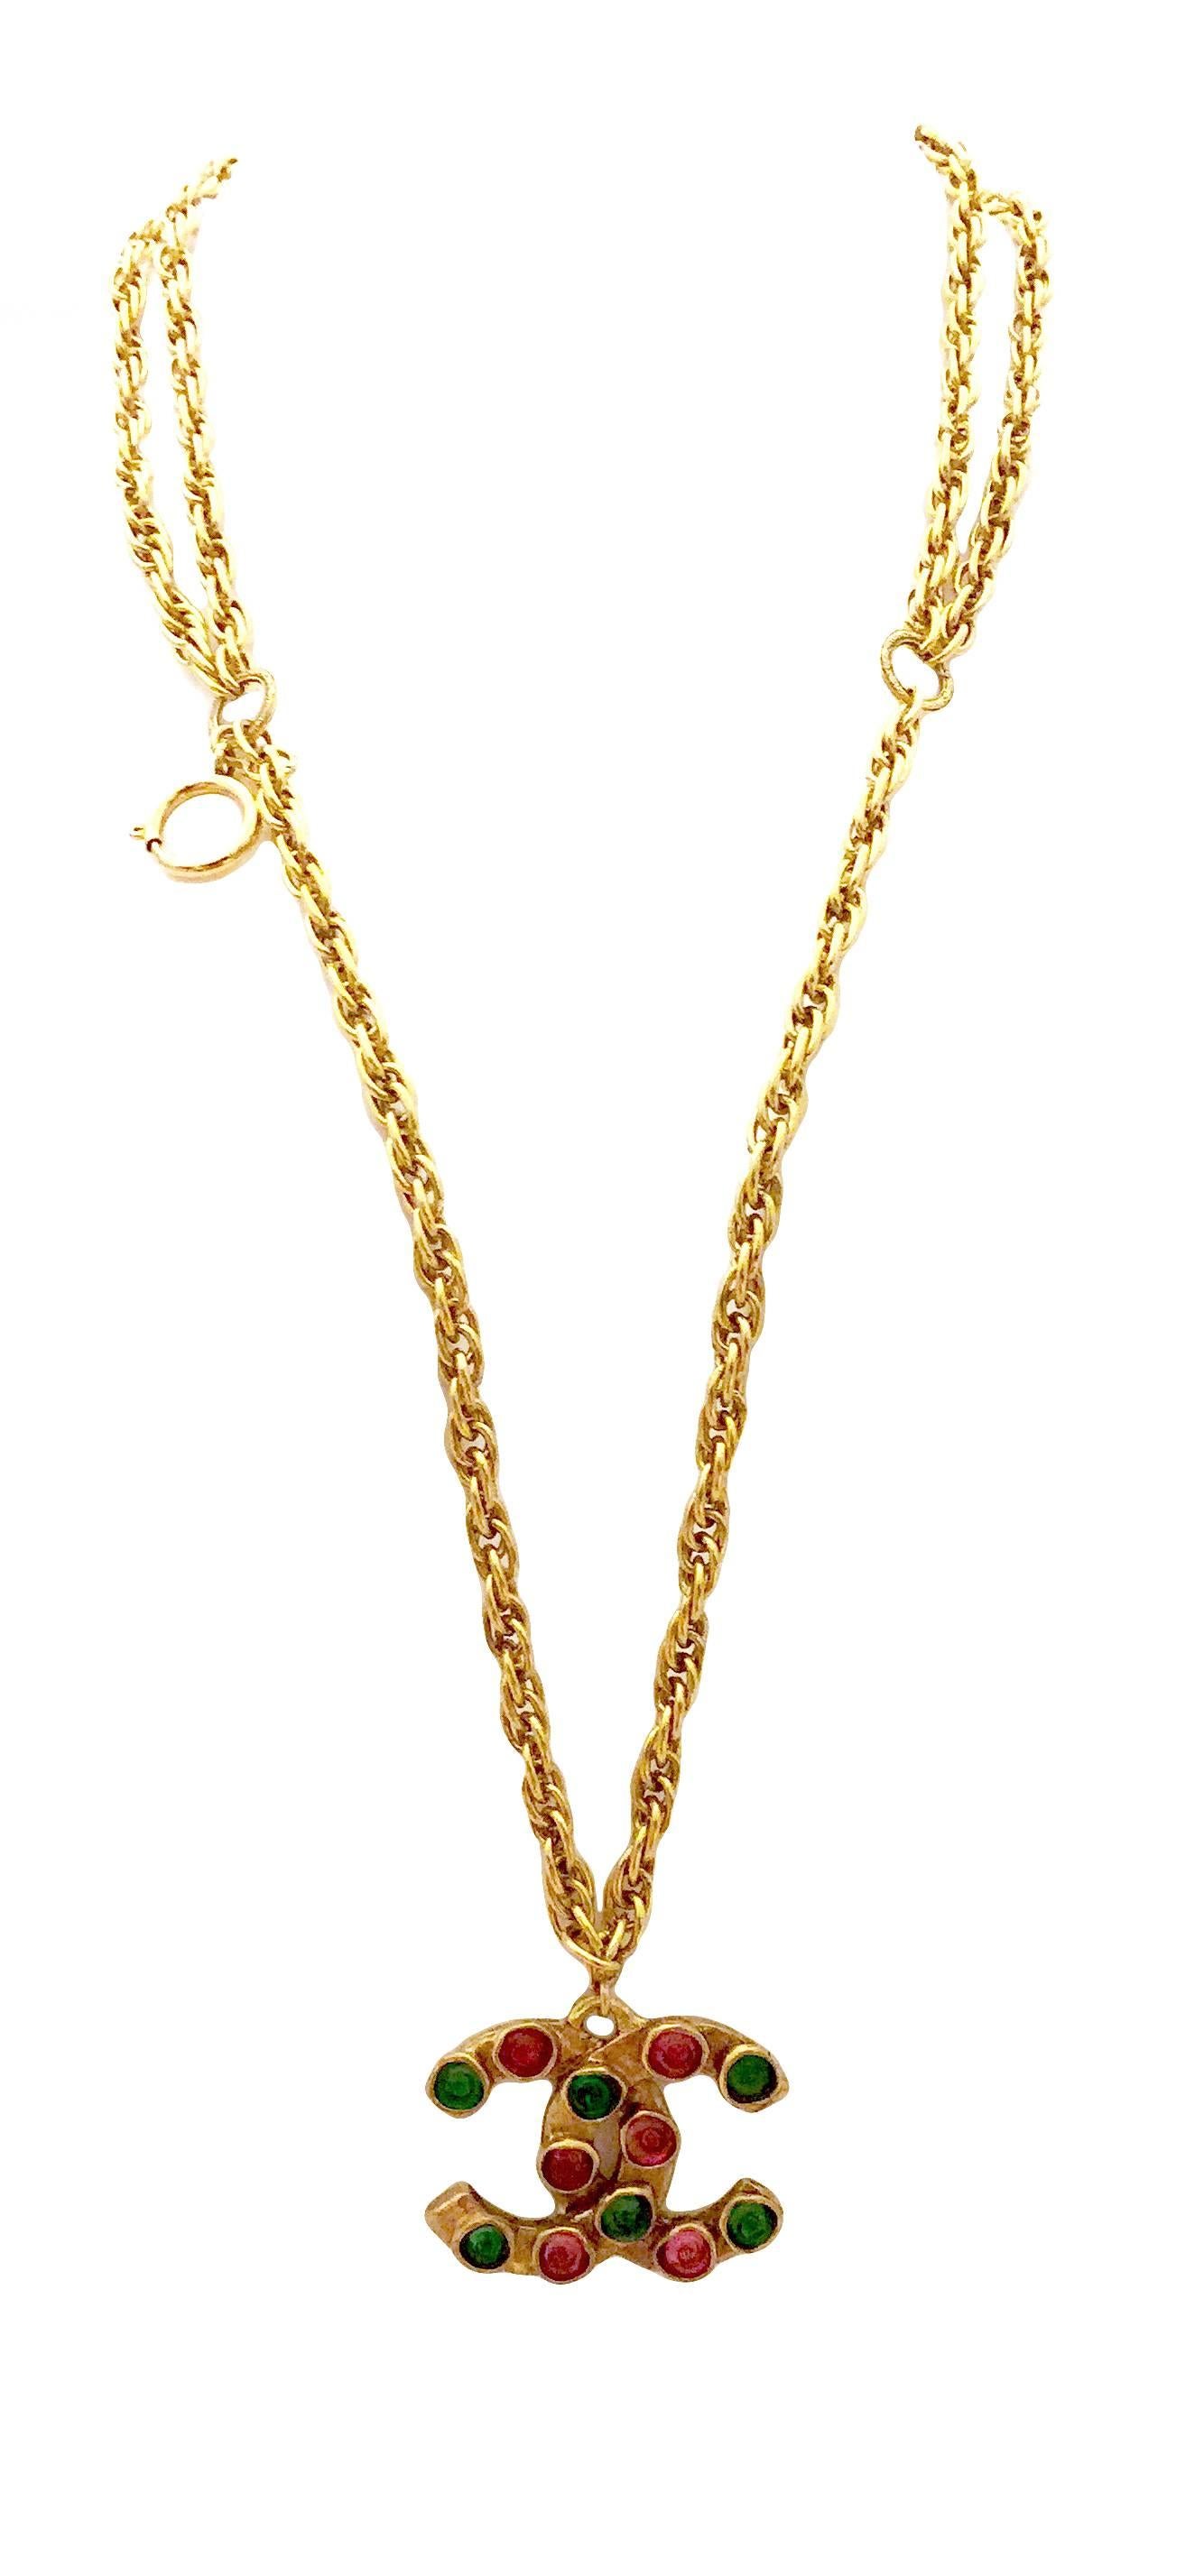 Iconic Chanel Vintage Gripoix CC Pendant Necklace, 1980s In Good Condition For Sale In Bethesda, MD